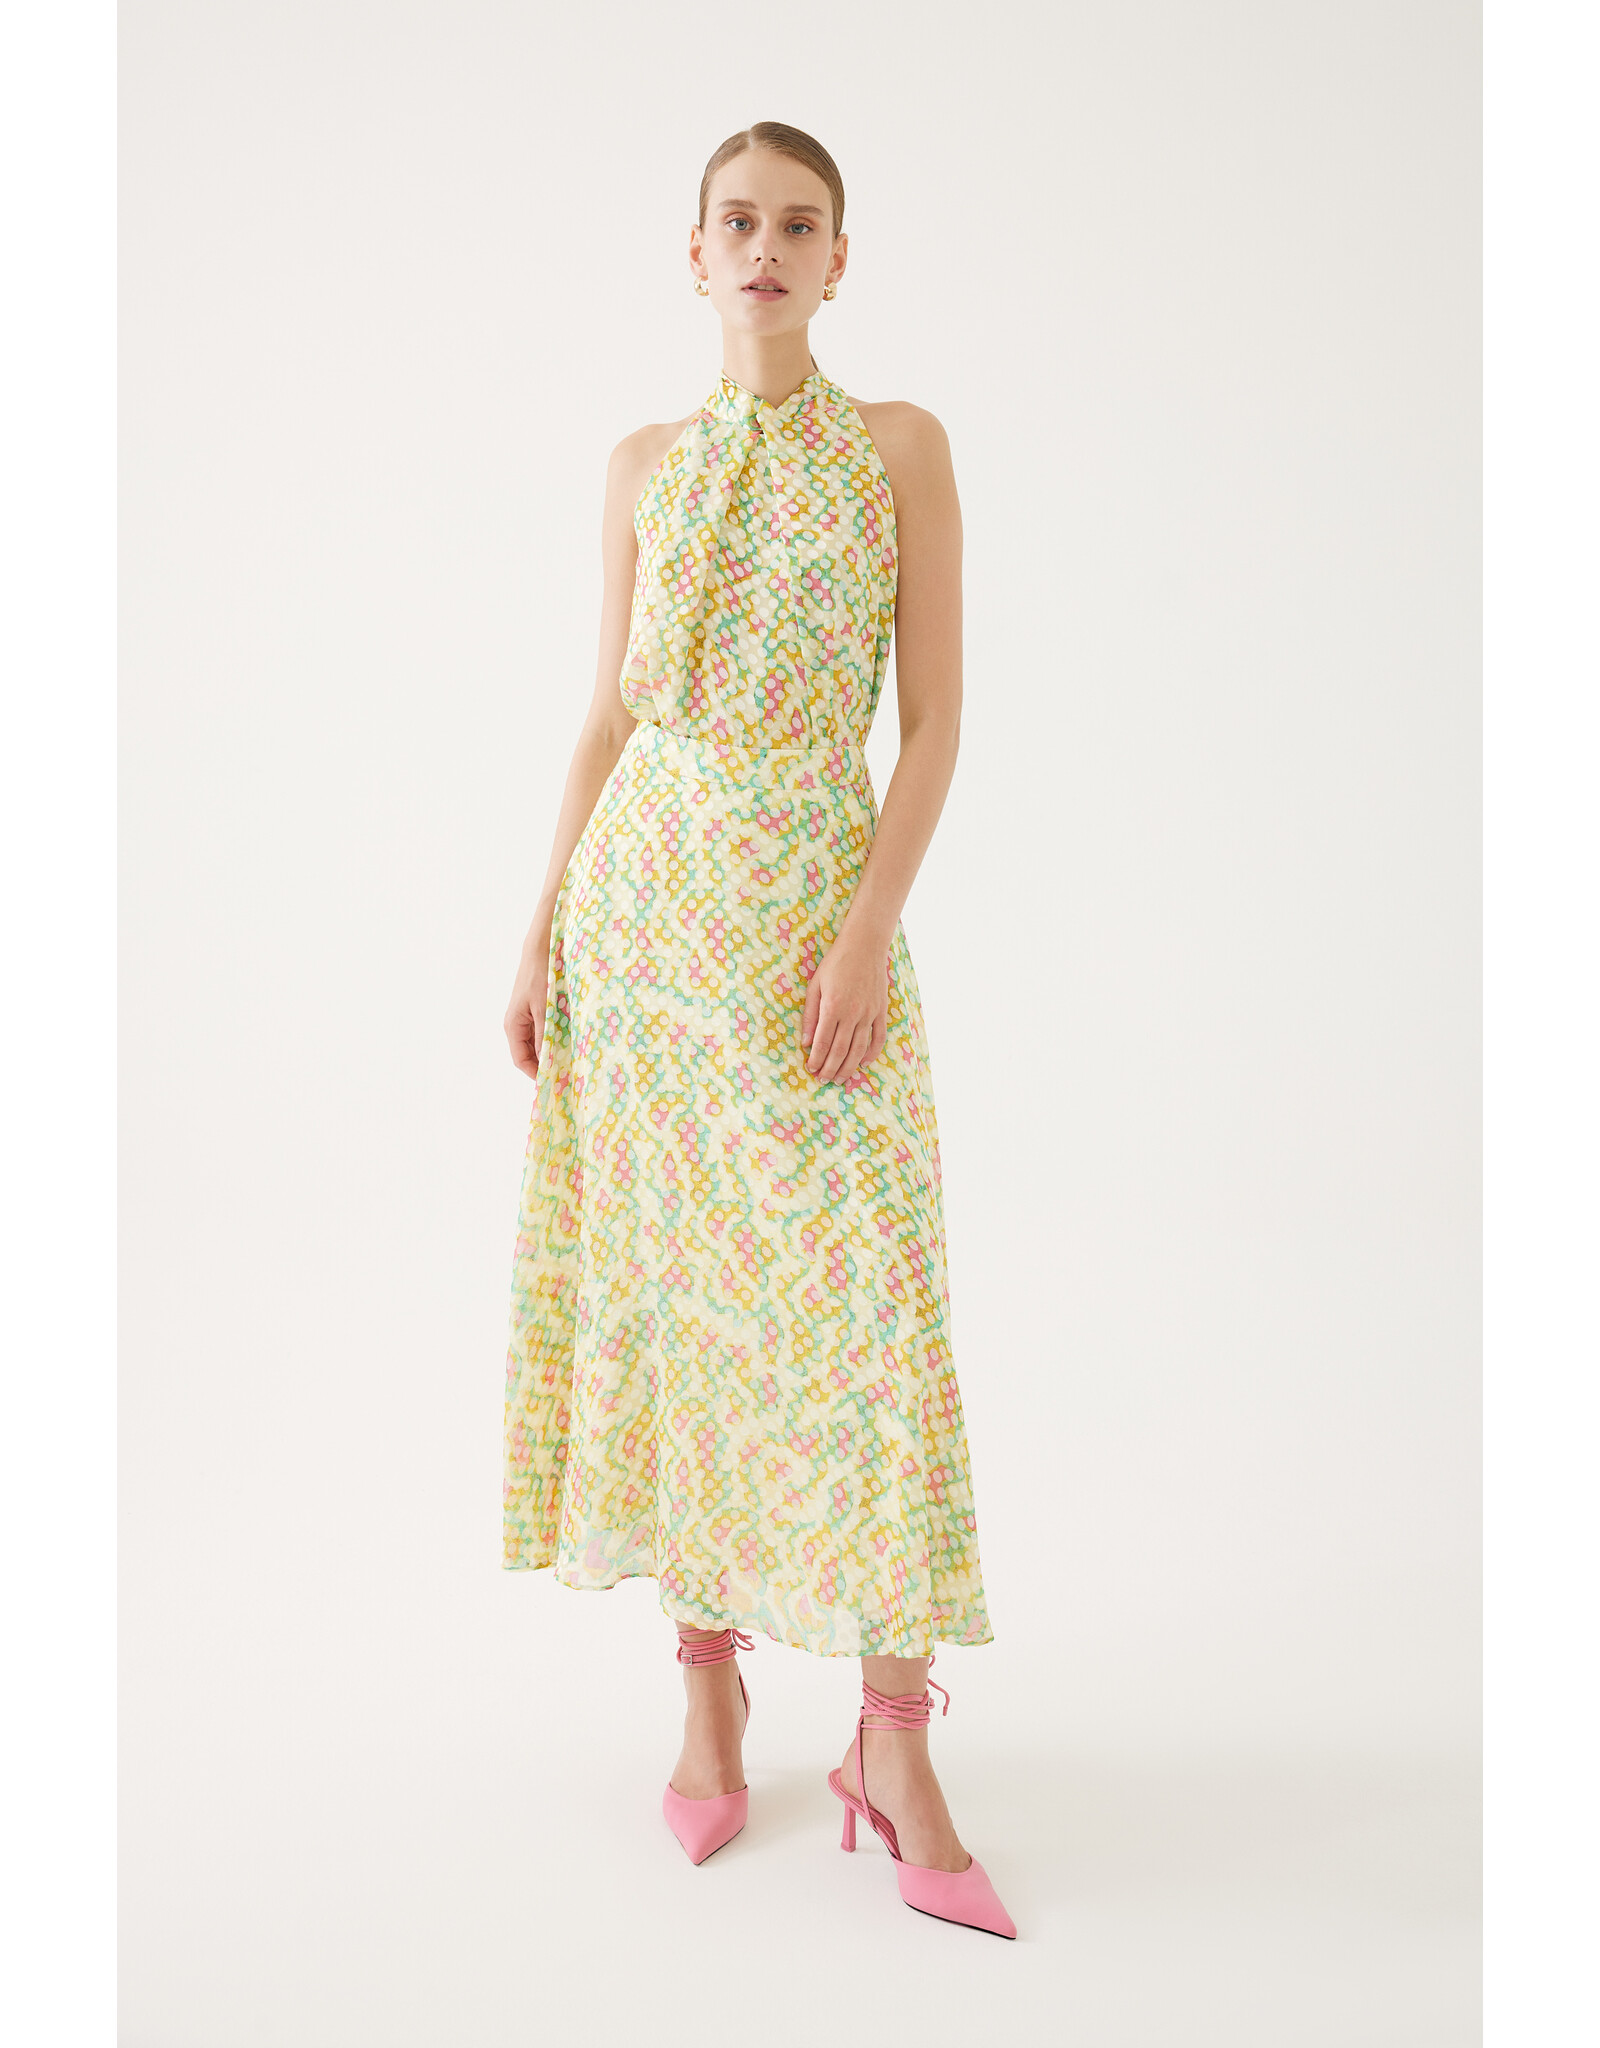 Exquise Exquise - 4215007 - Long Sorbet Print Skirt